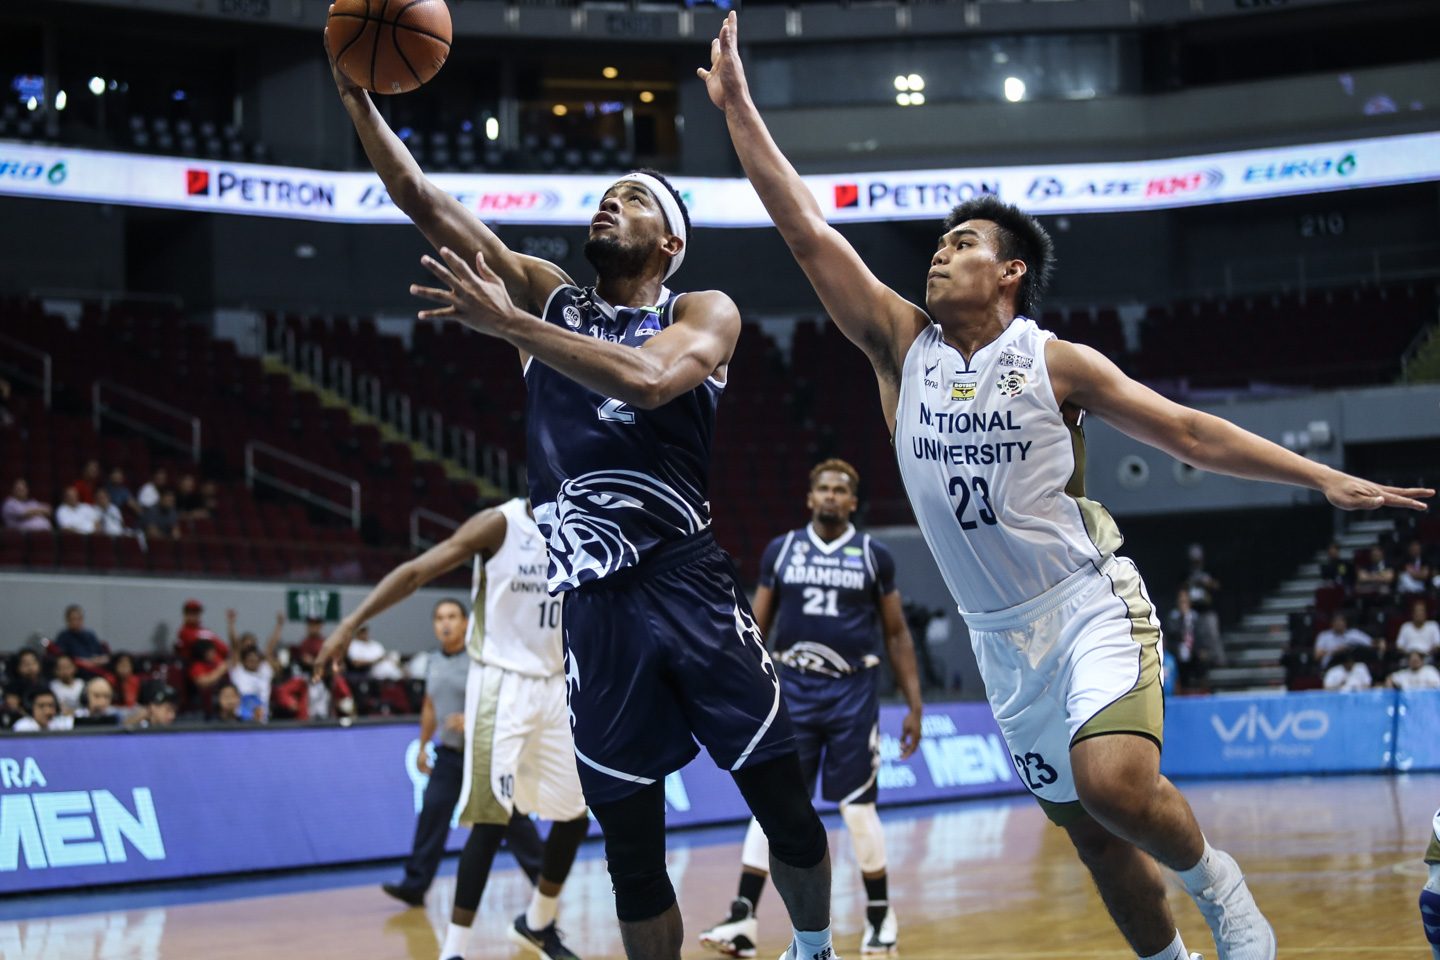 Resurgent Adamson looks to solidify hold of top spot